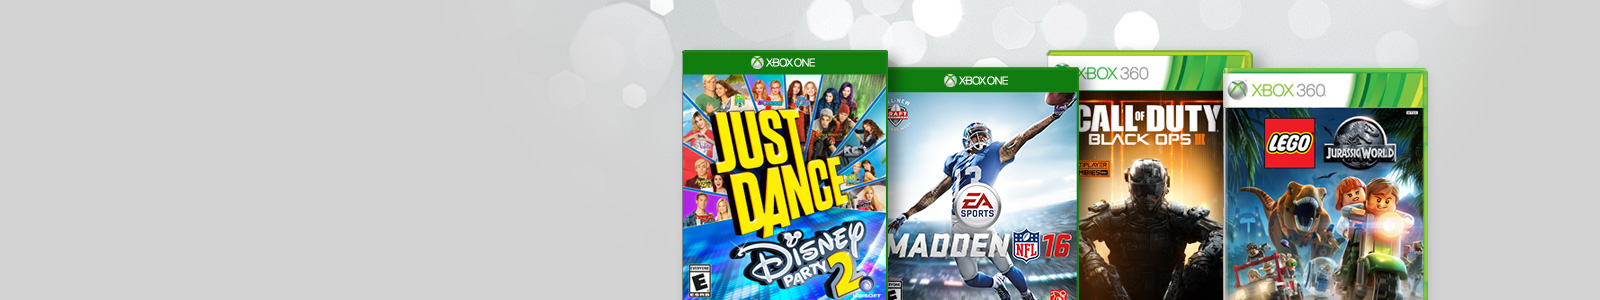 Video Game Deals at Microsoft Store | Skylanders, Just Dance, Call of Duty, and MORE!